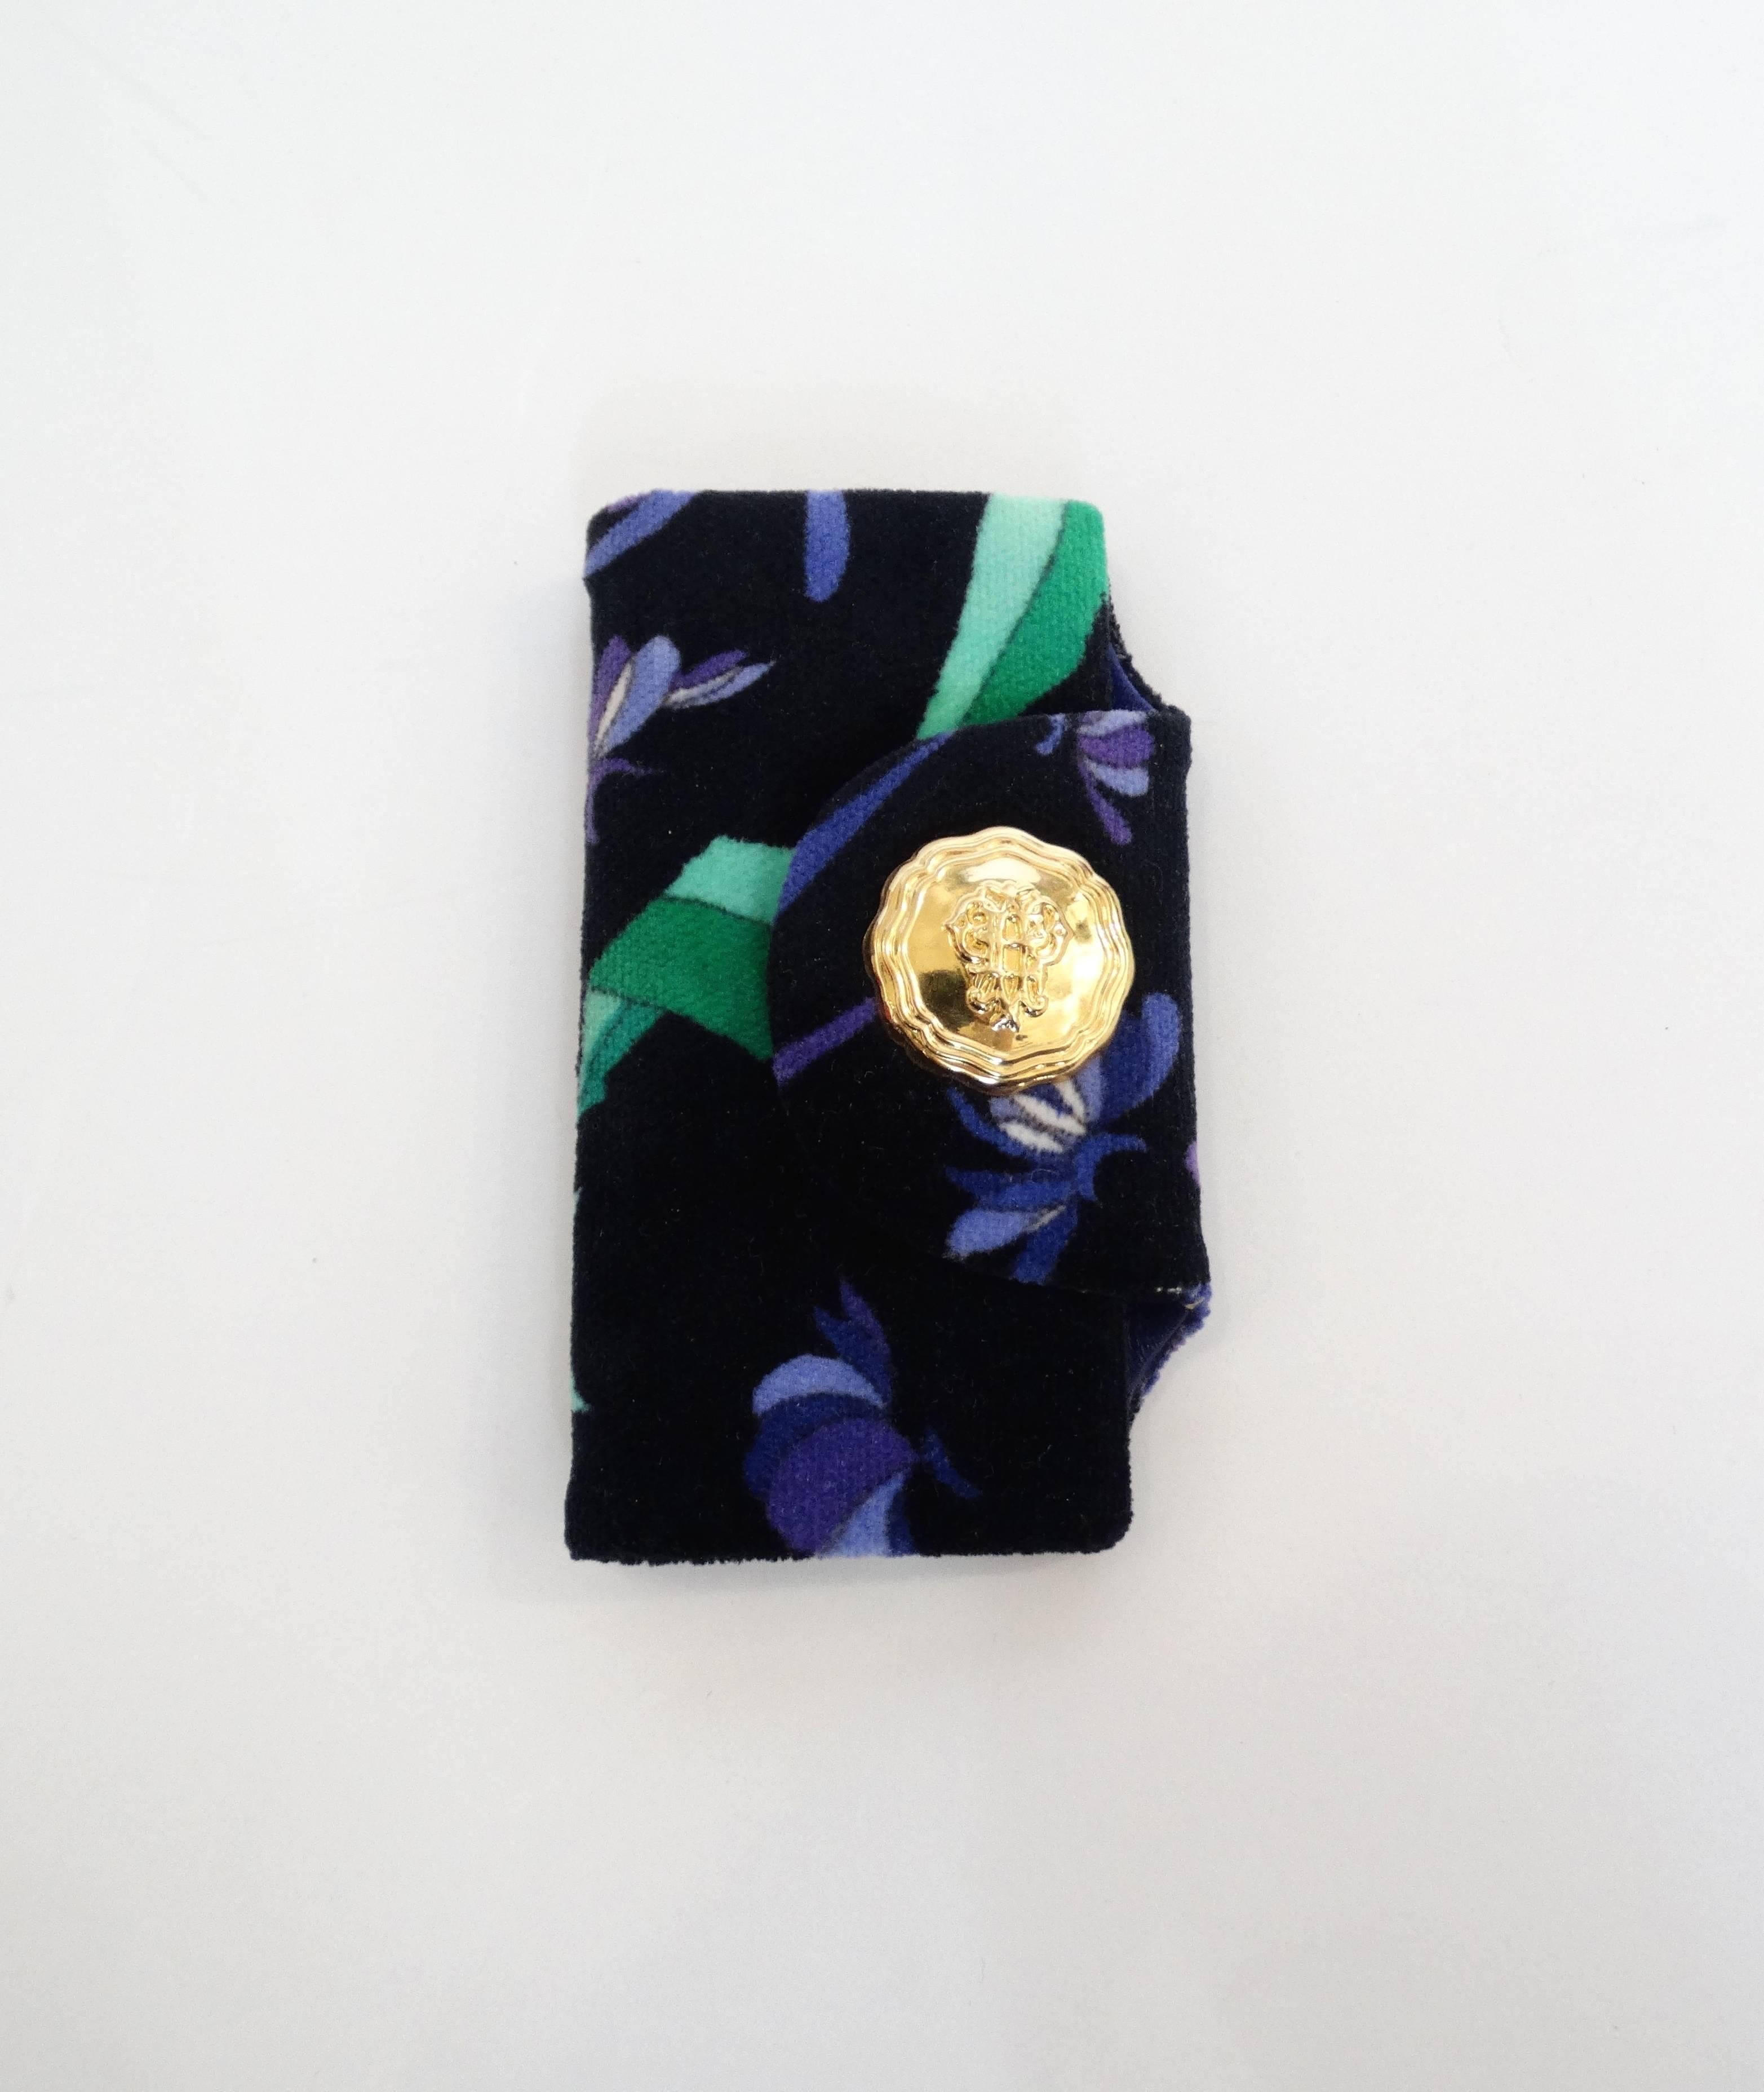 Keep all your keys in one place with our Emilio Pucci key case! Made of a super soft velvet with classic Pucci swirl pattern in shades of blue, violet and green. Fully lined with violet leather. Hooks all along the top of the case for each of your